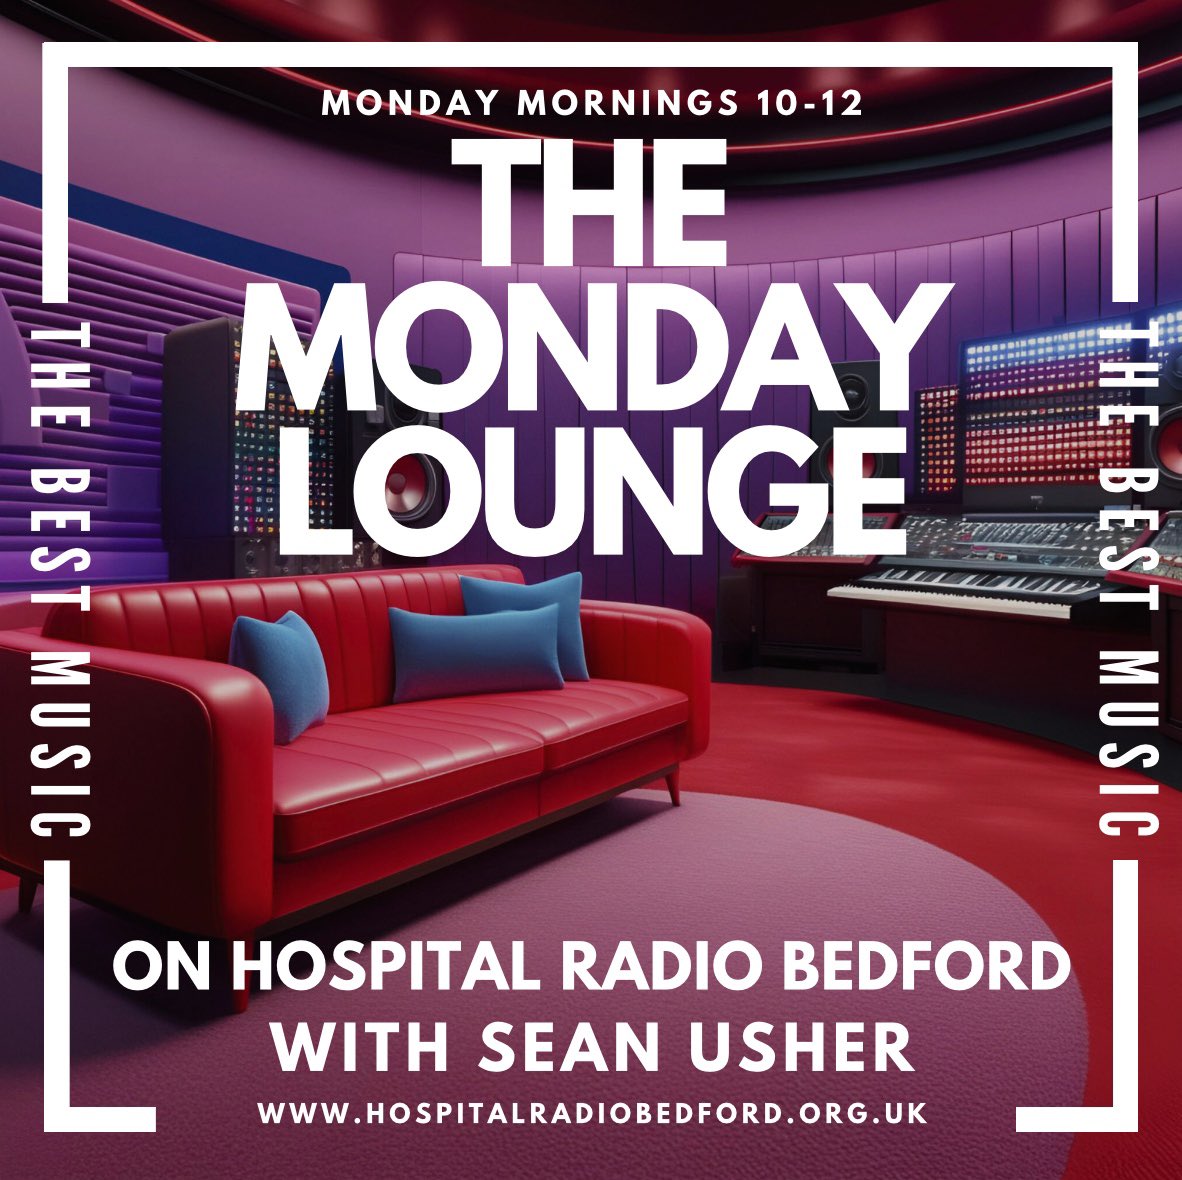 Another great new single playing right now in The Monday Lounge on @hrbedford @NickTudorSolo with Rain Down on Me 😊